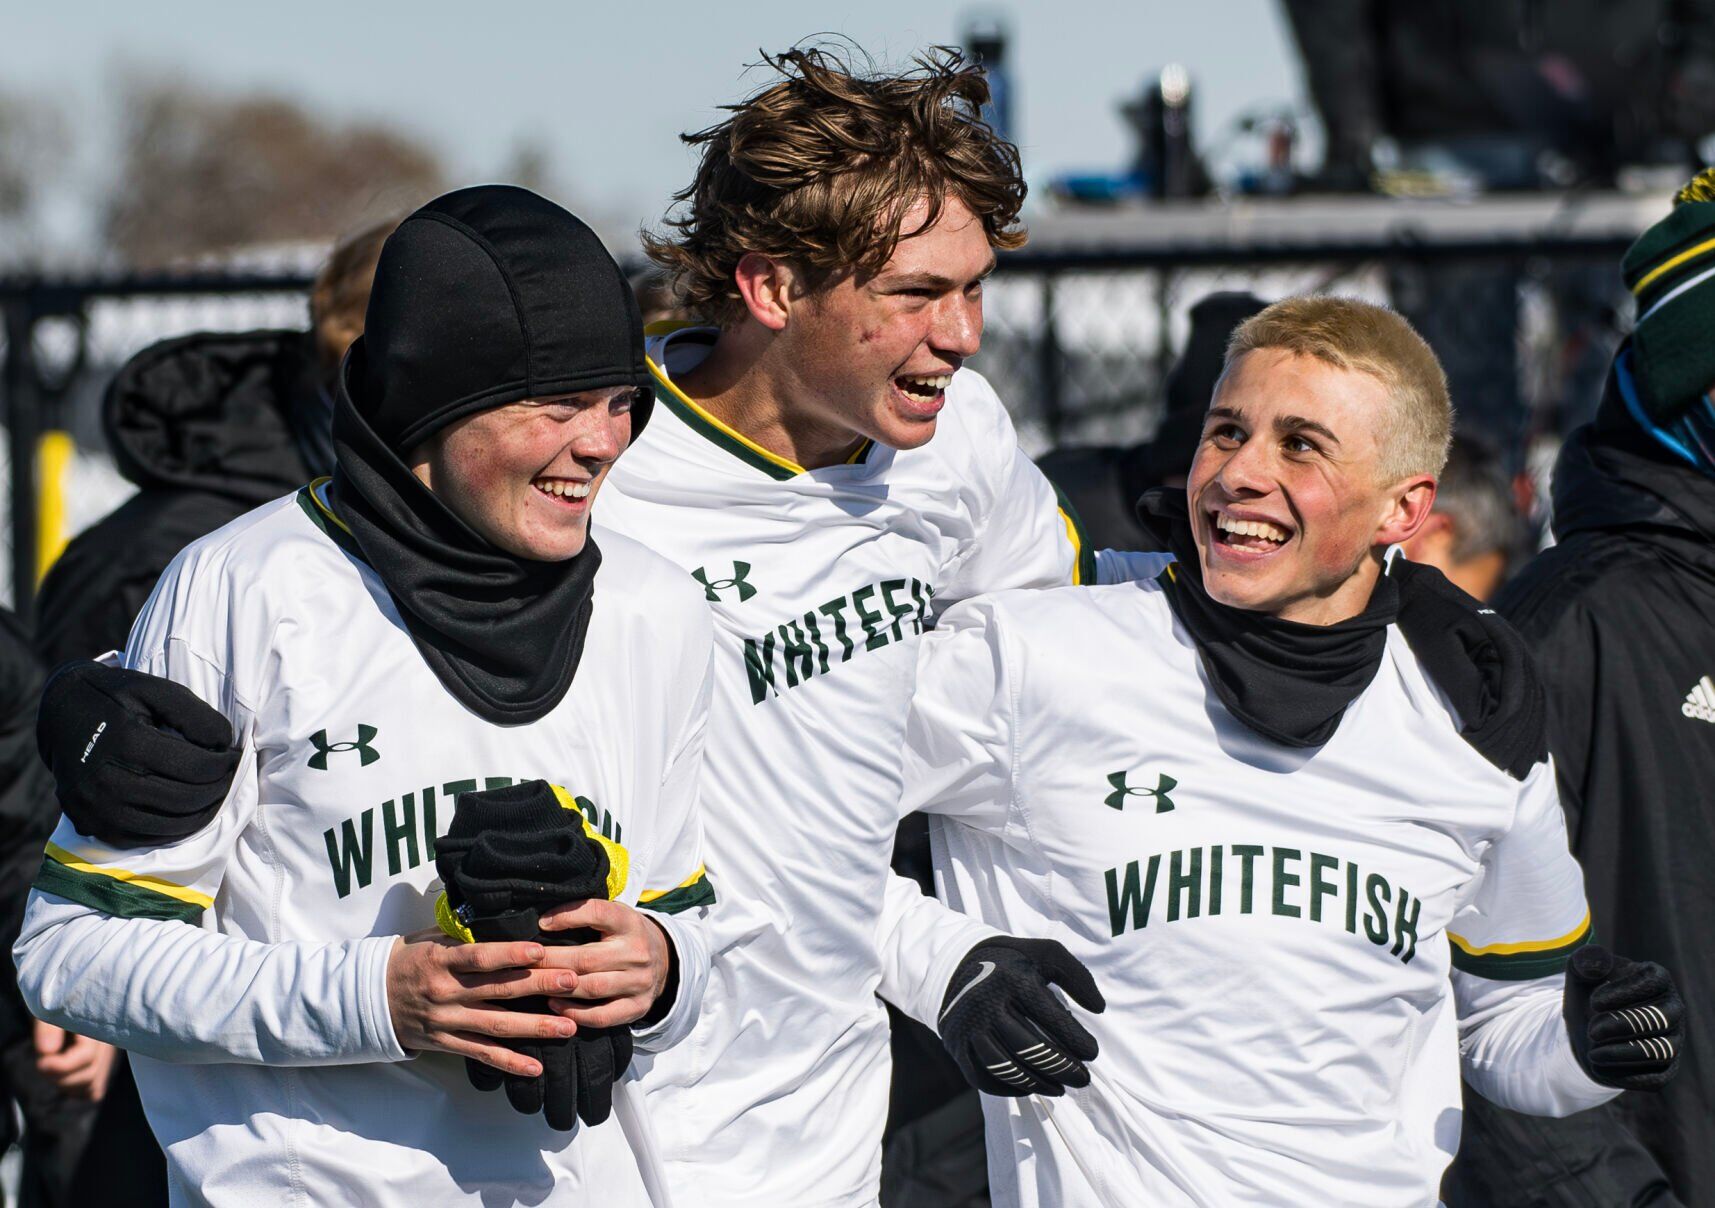 Whitefish Boys Soccer Claims 10th State Championship With Perfect Season